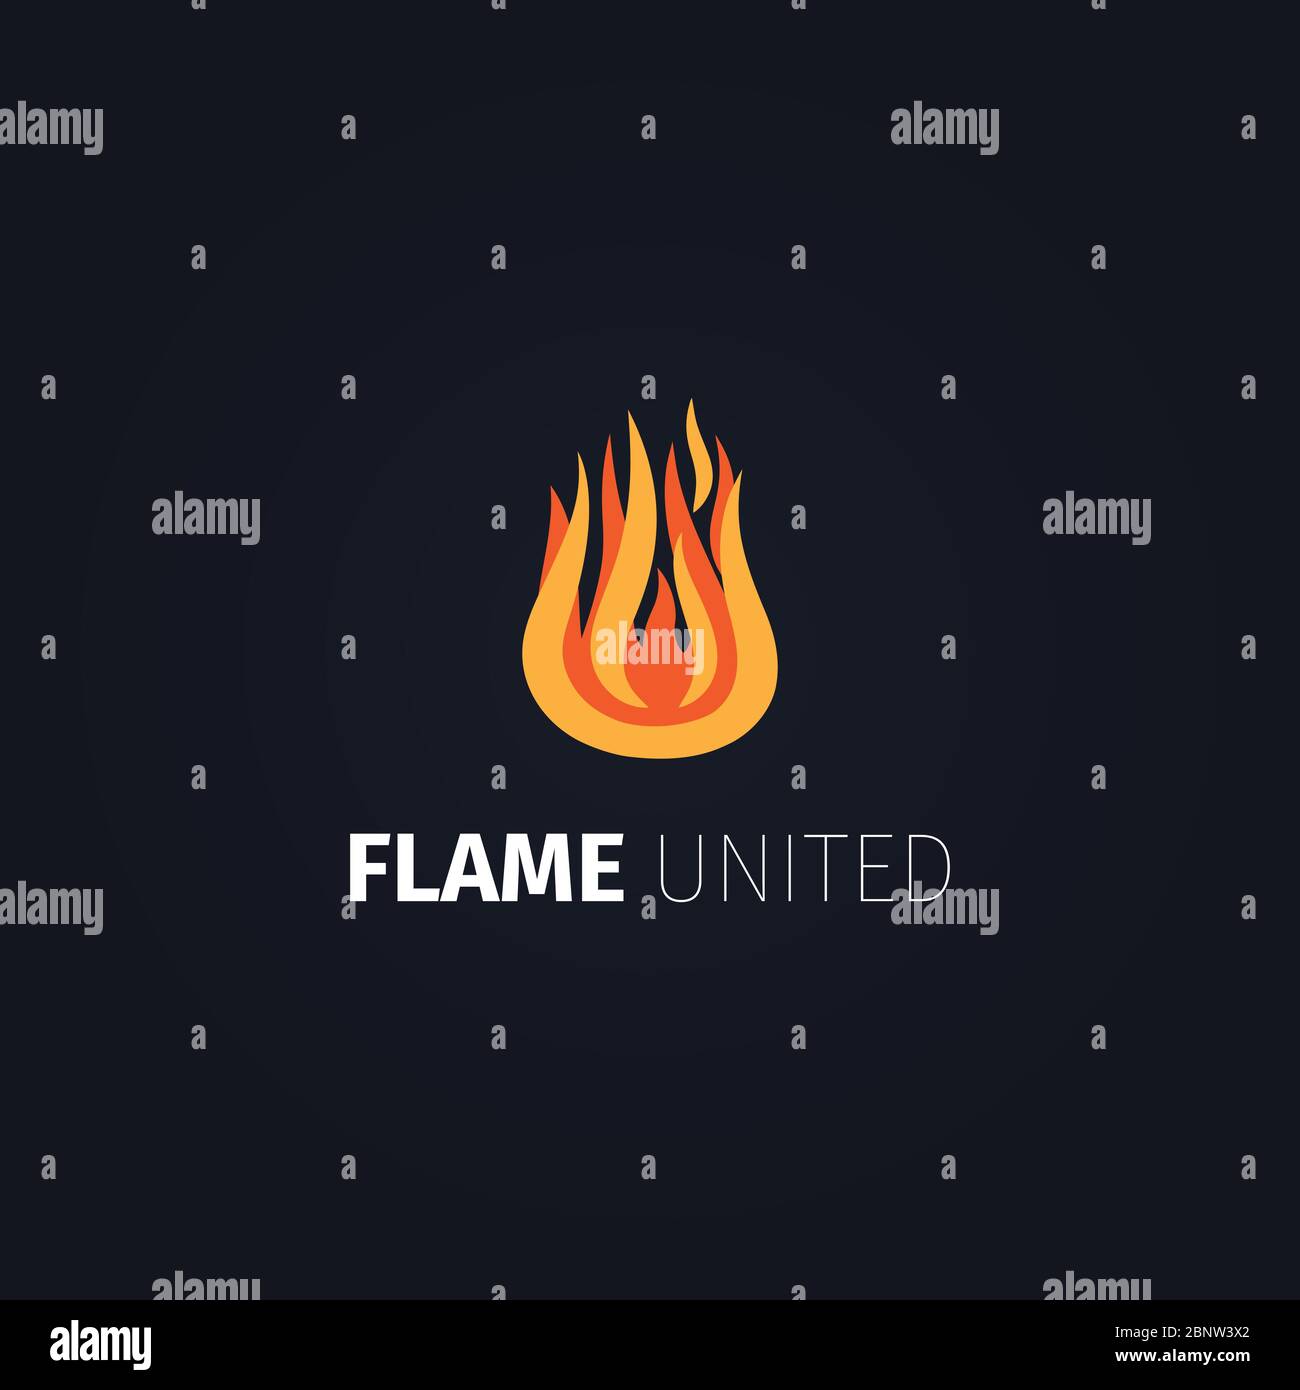 Fire icon. Vector flame united logo template isolated on dark background Stock Vector